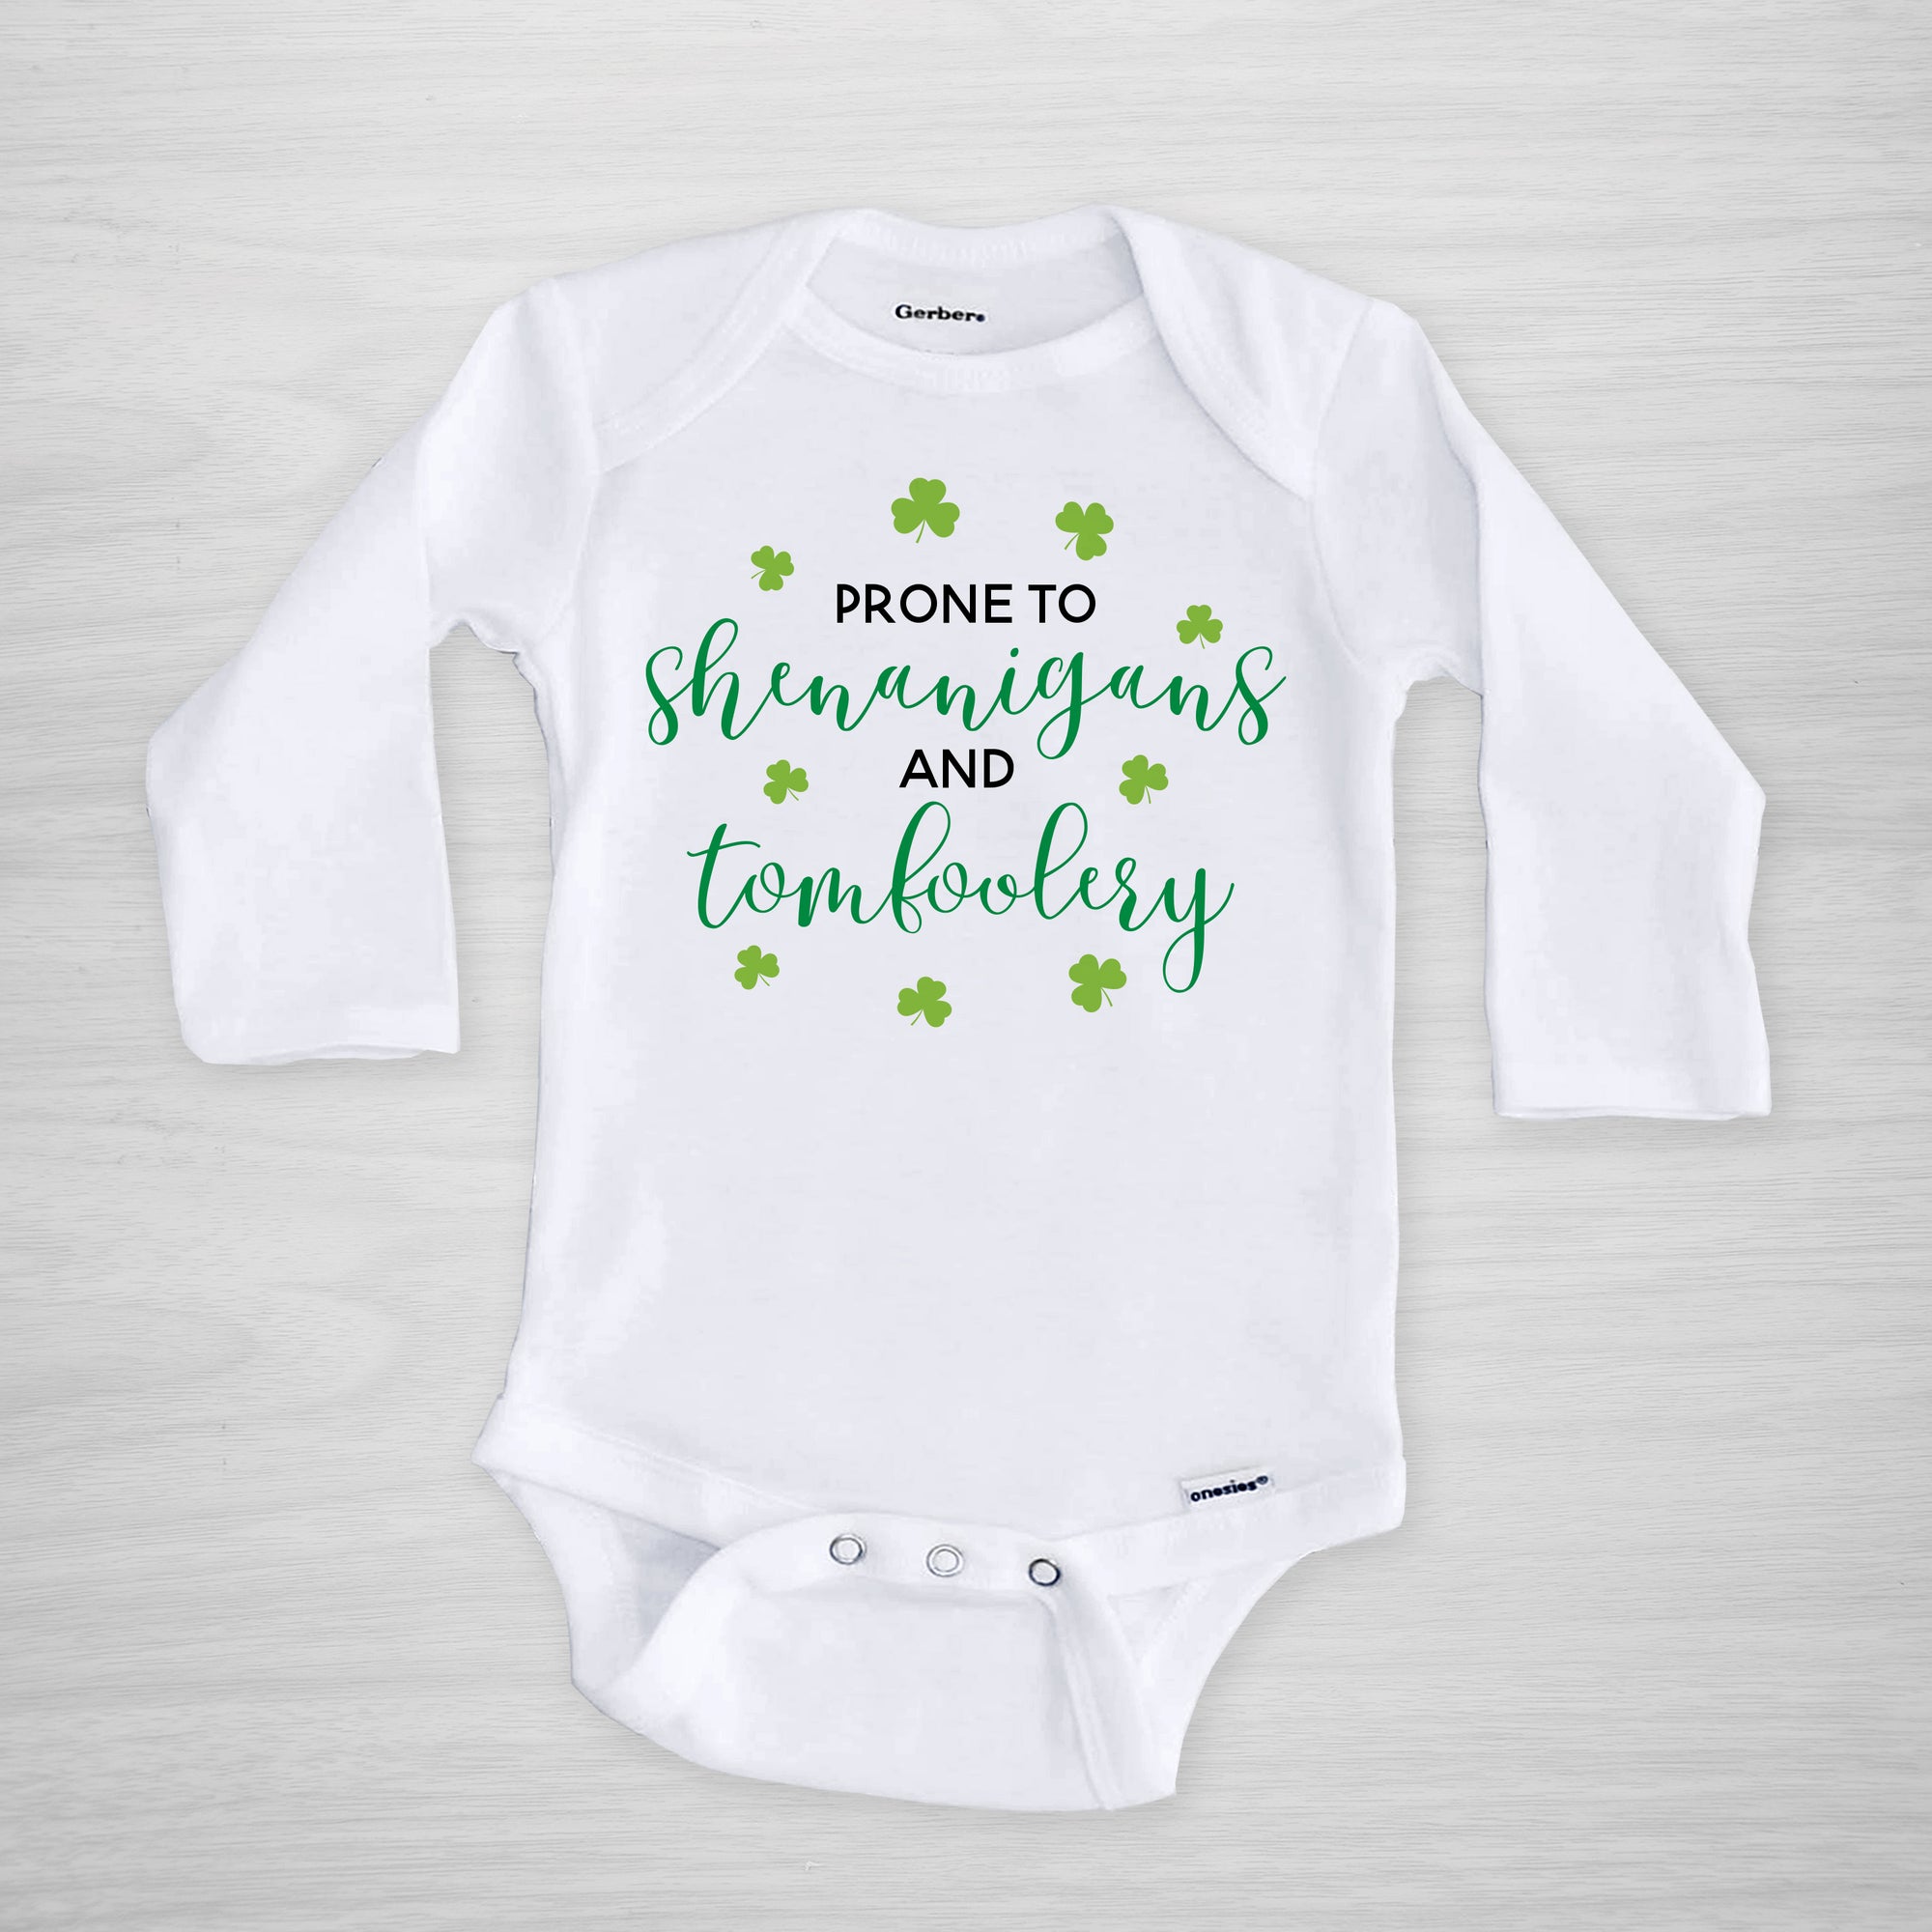 Prone to Shenanigans and Tomfoolery St. Patrick's Day Gerber Onesie, short sleeved